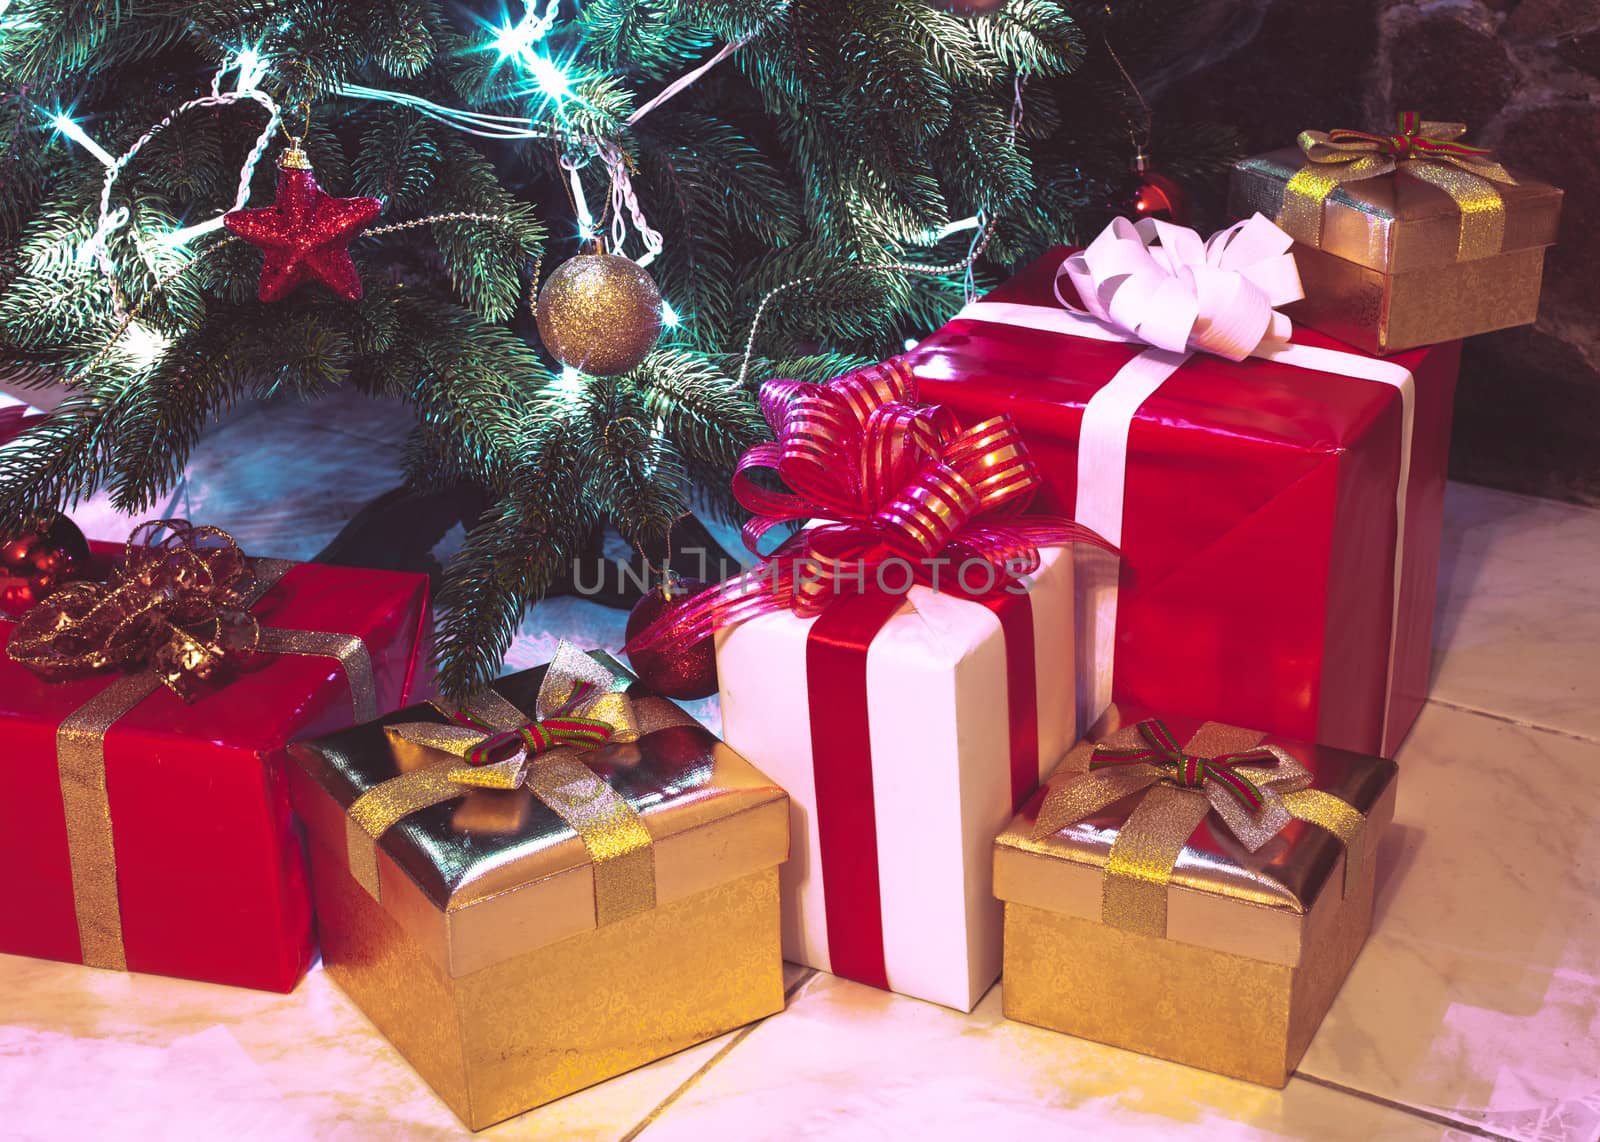 Presents boxes under the Christmas tree. Gold, red and white colours